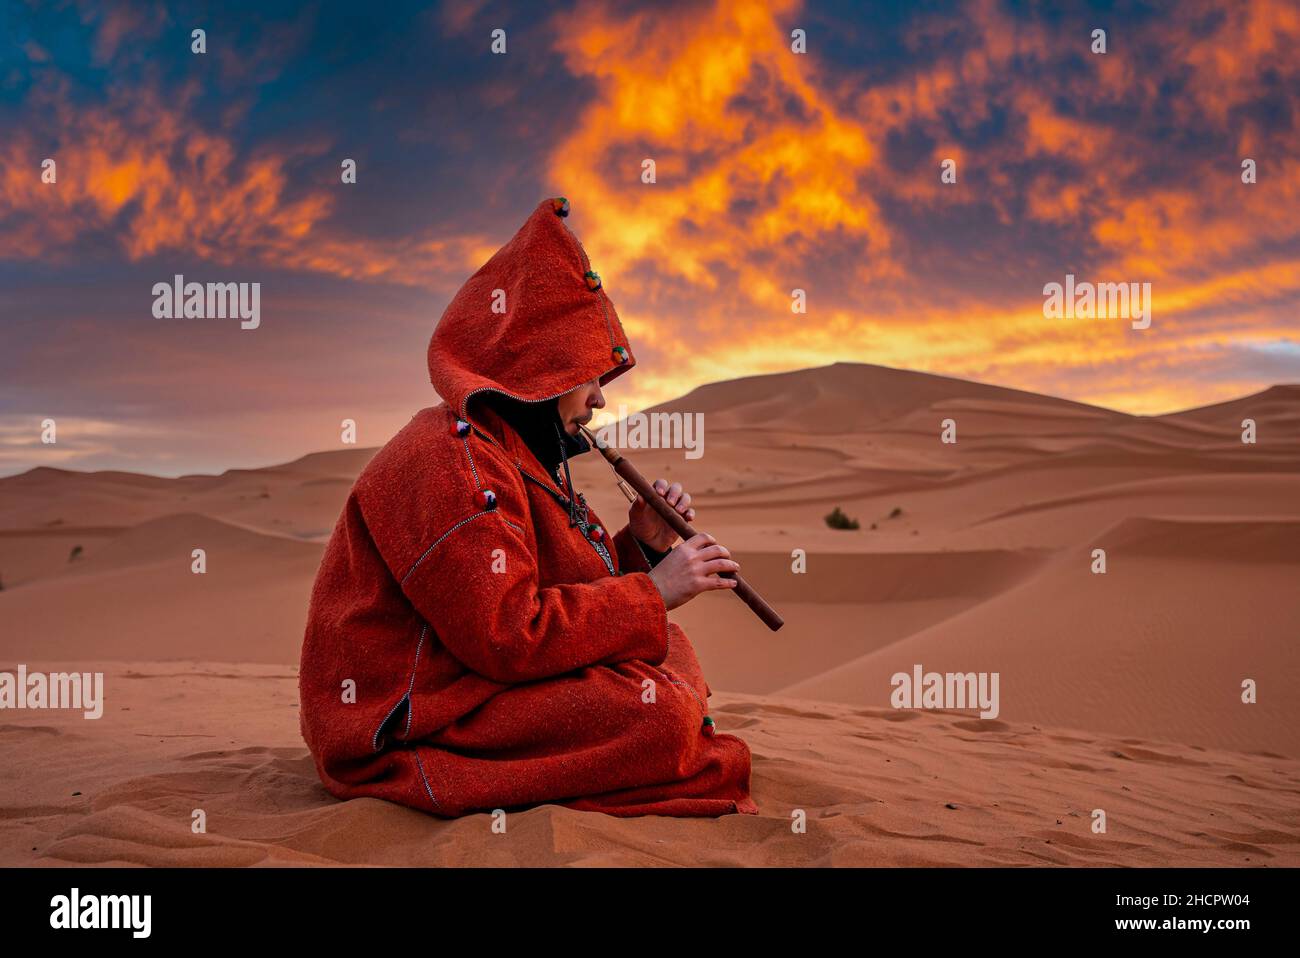 Man in traditional red clothes playing flute while sitting on sand in desert Stock Photo